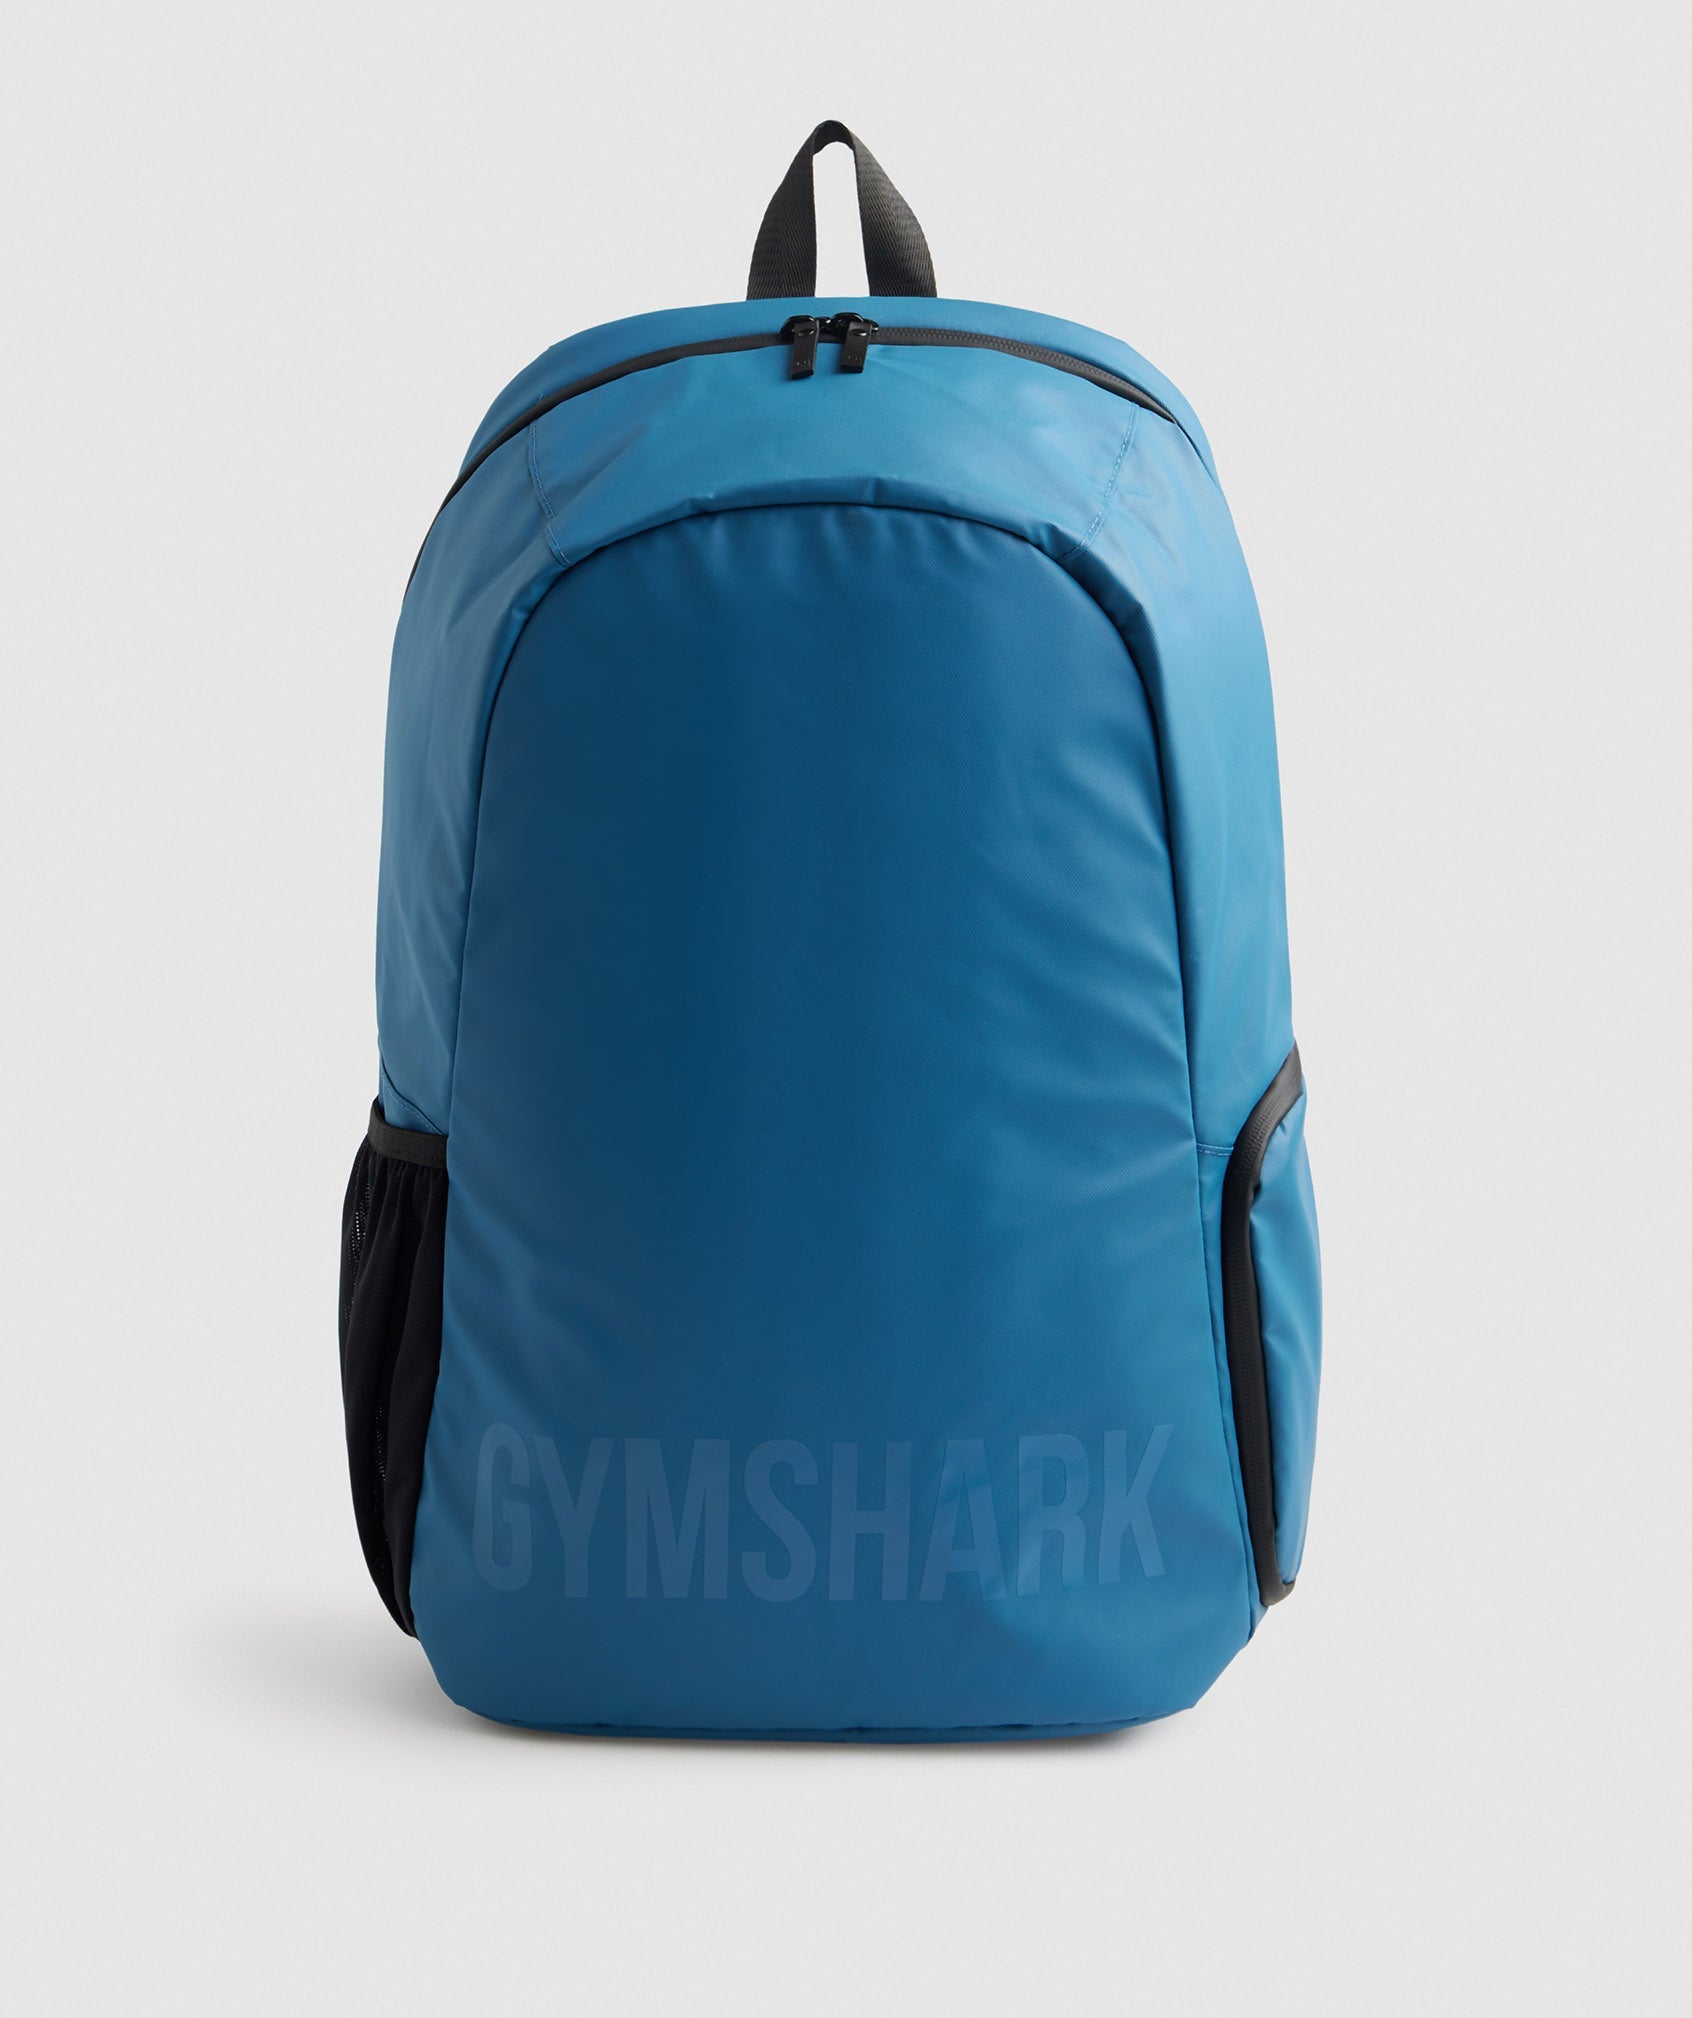 X-Series 0.1 Backpack in Lakeside Blue - view 1